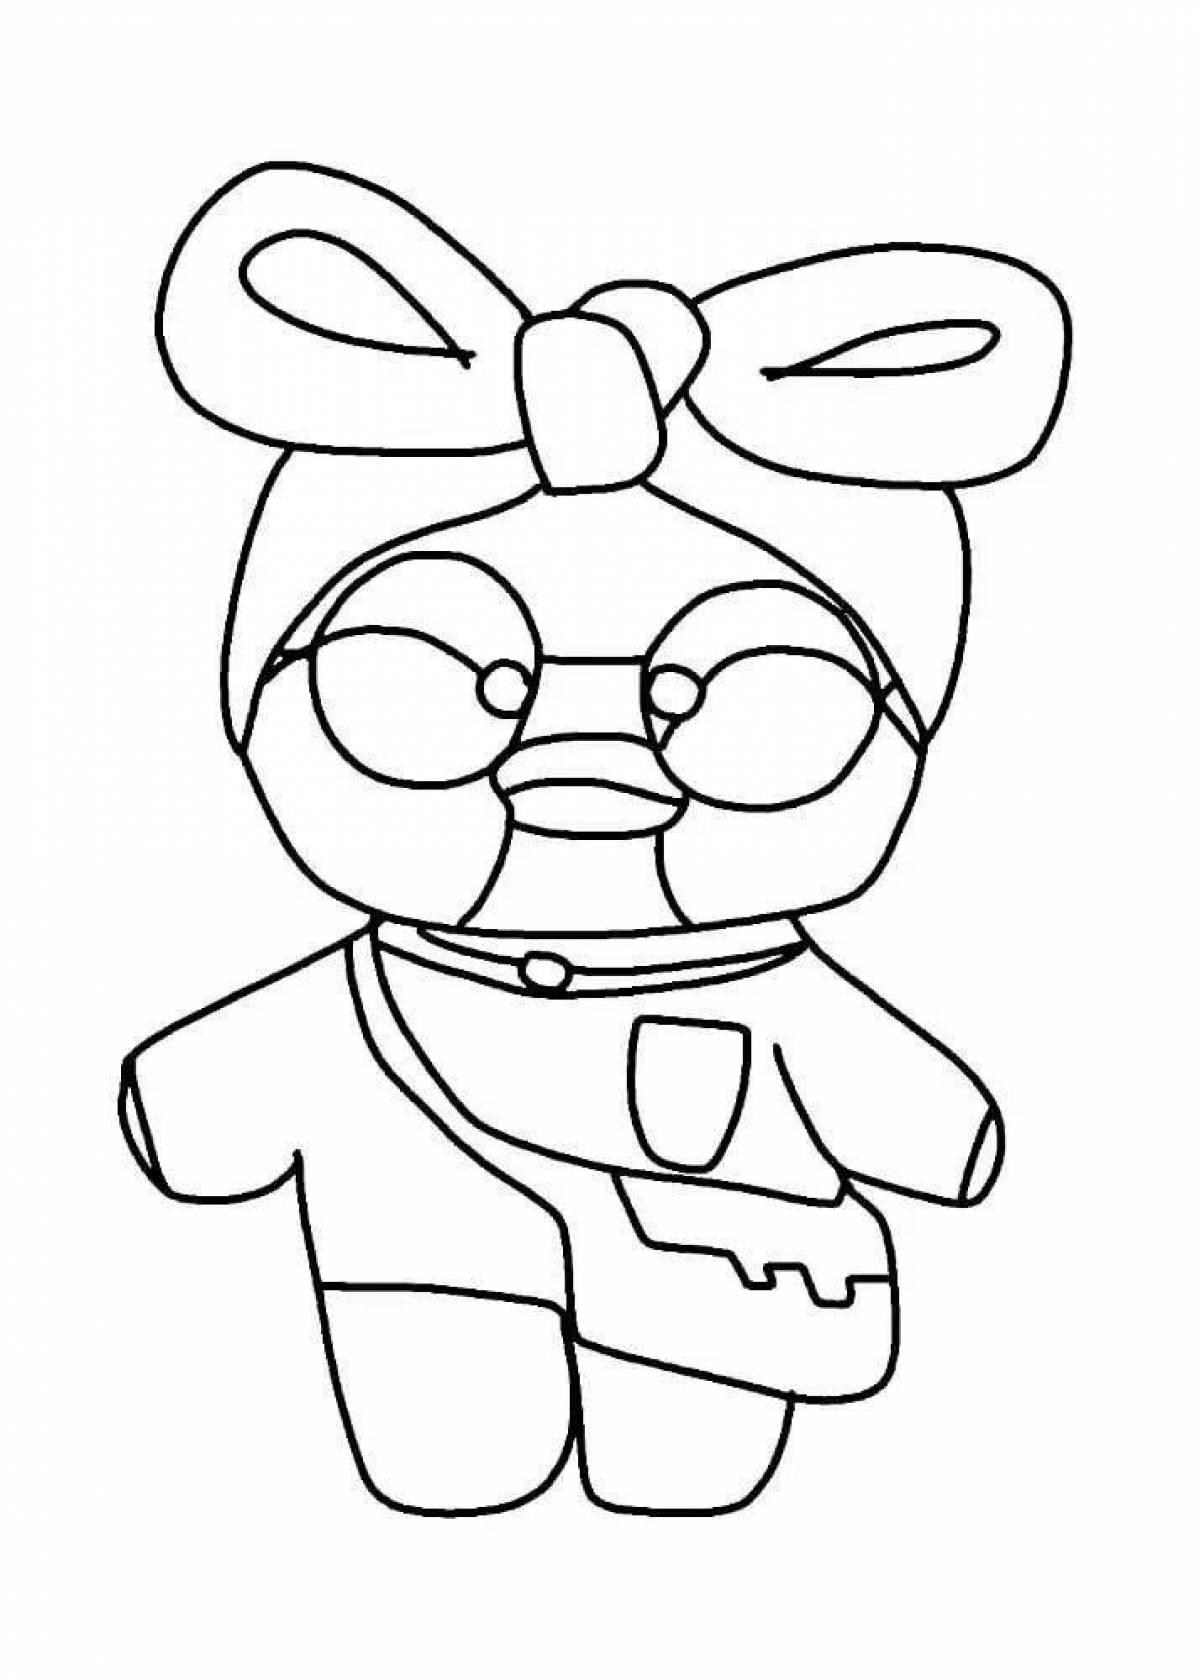 Attractive lalaphan duck coloring page with clothes